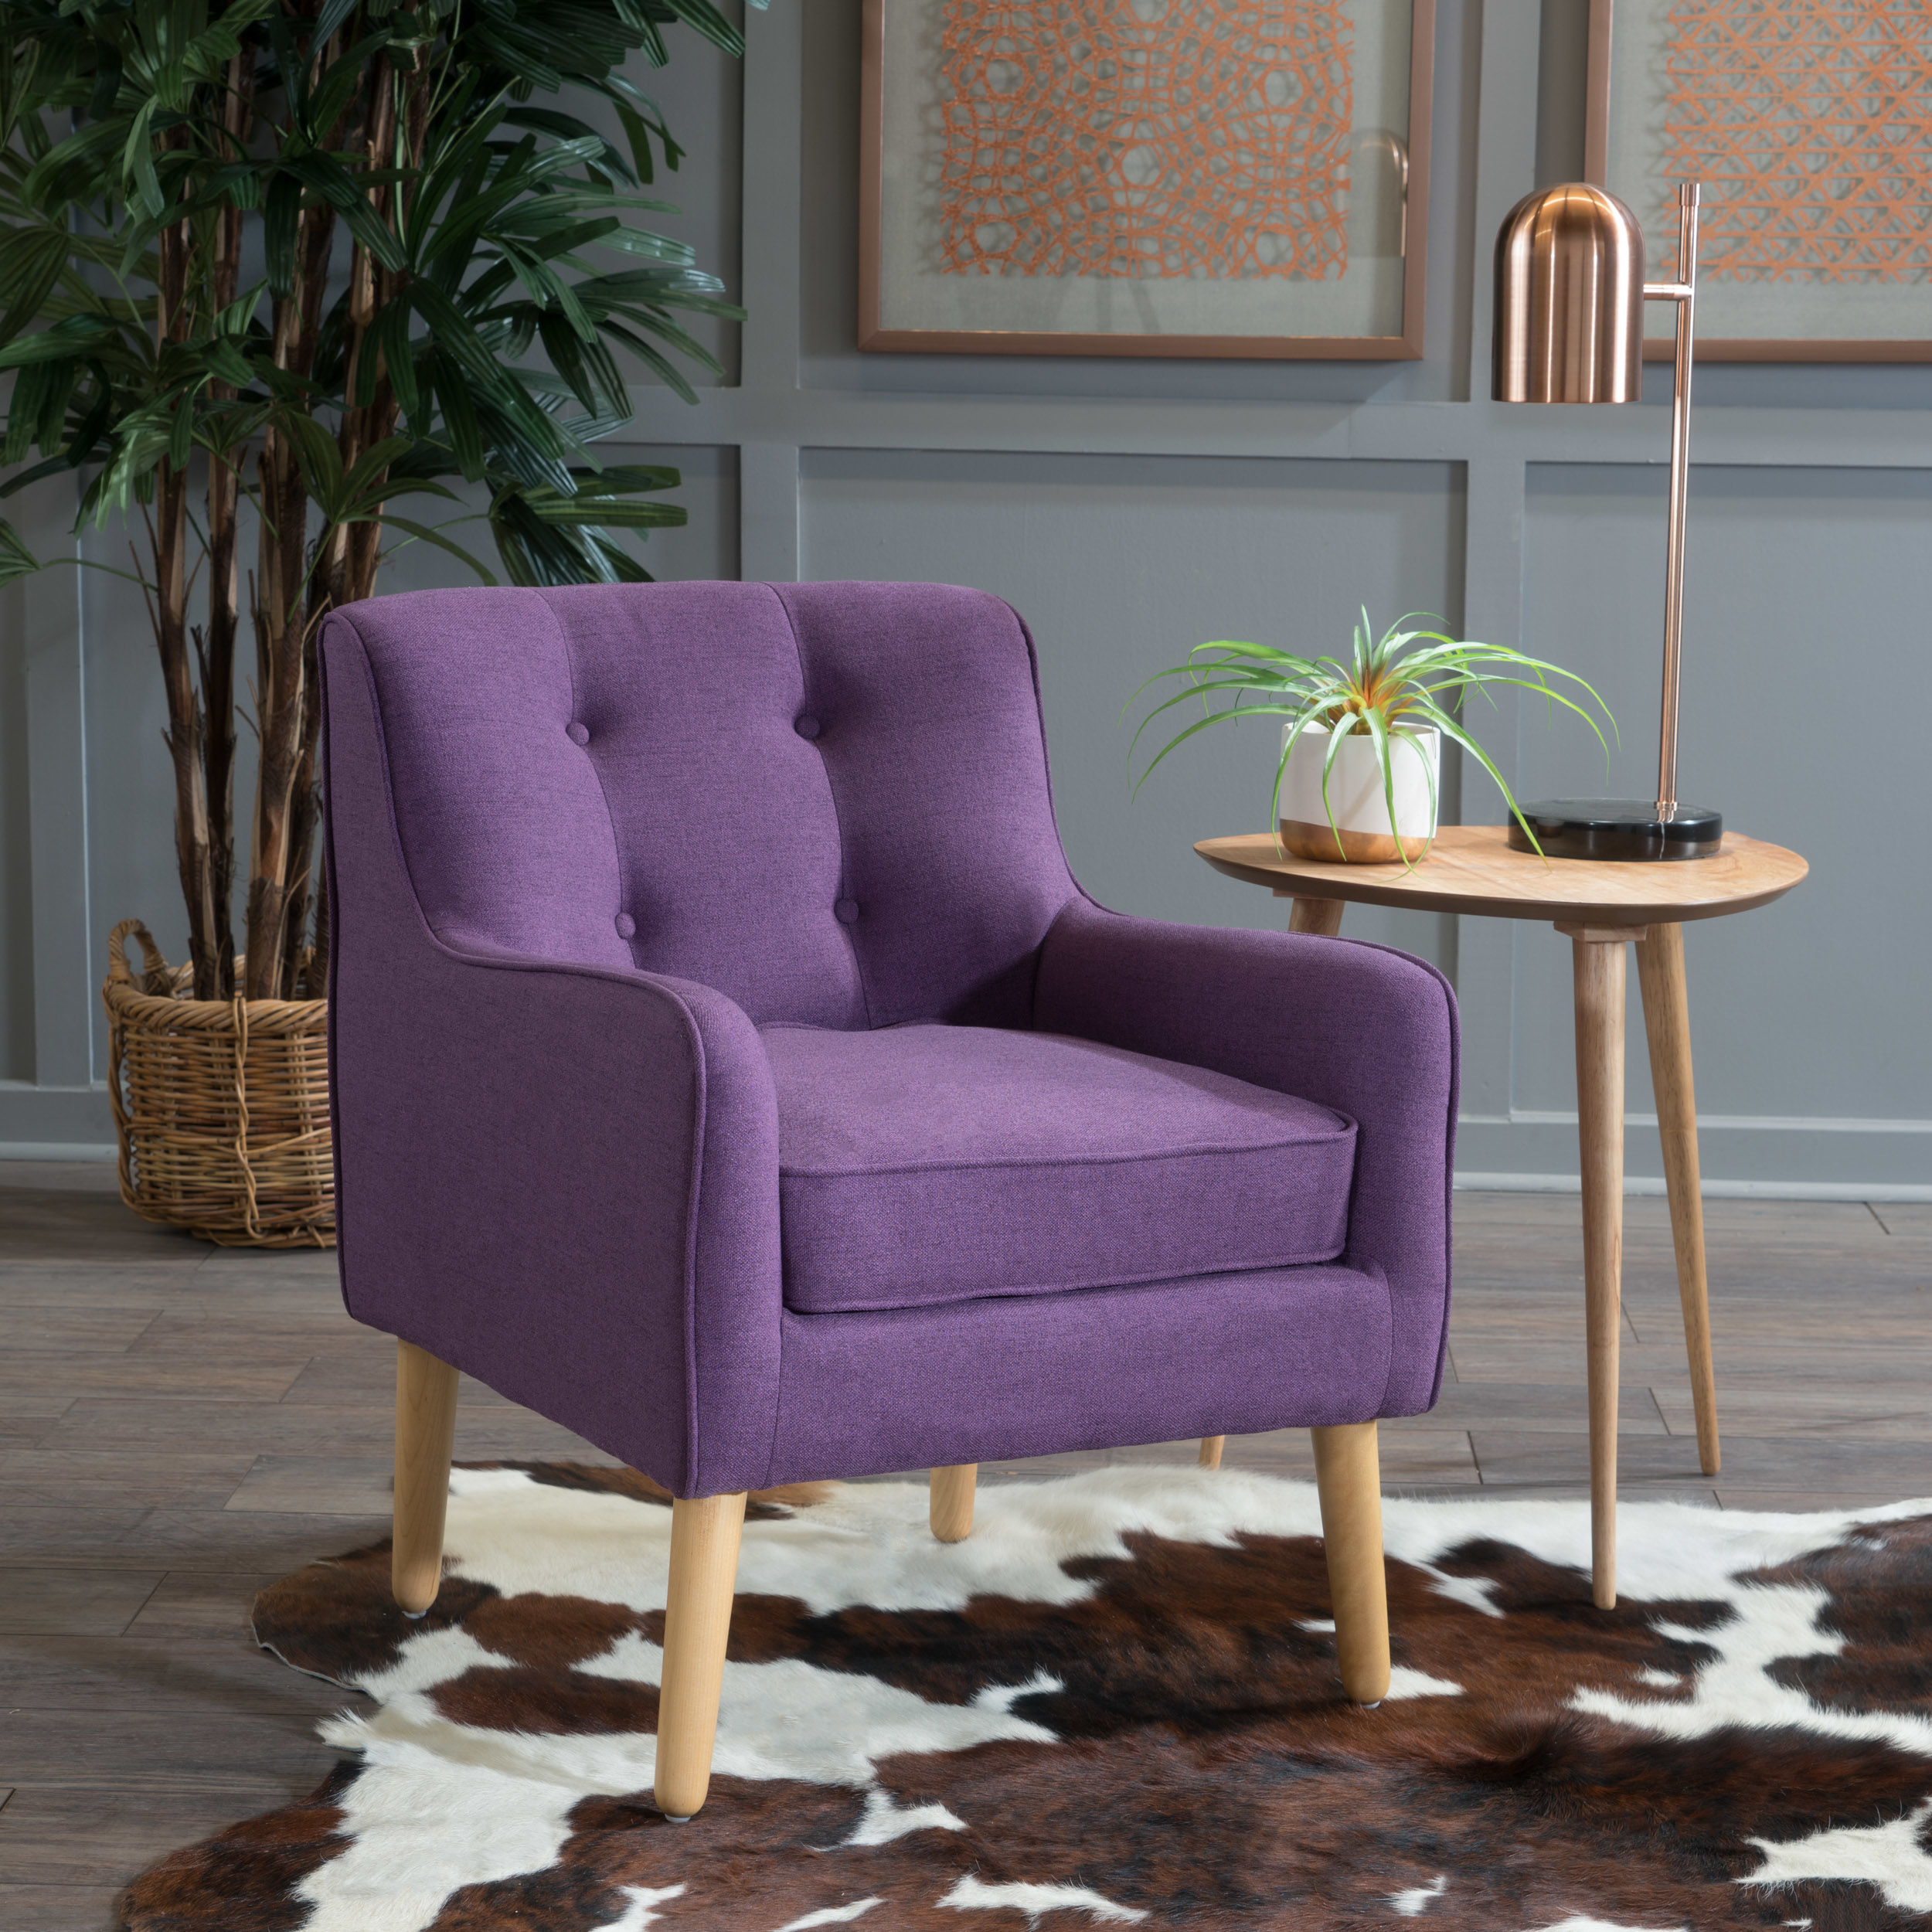 Fontinella Mid Century Tufted Back Fabric Arm Chair - Purple, Set Of 1